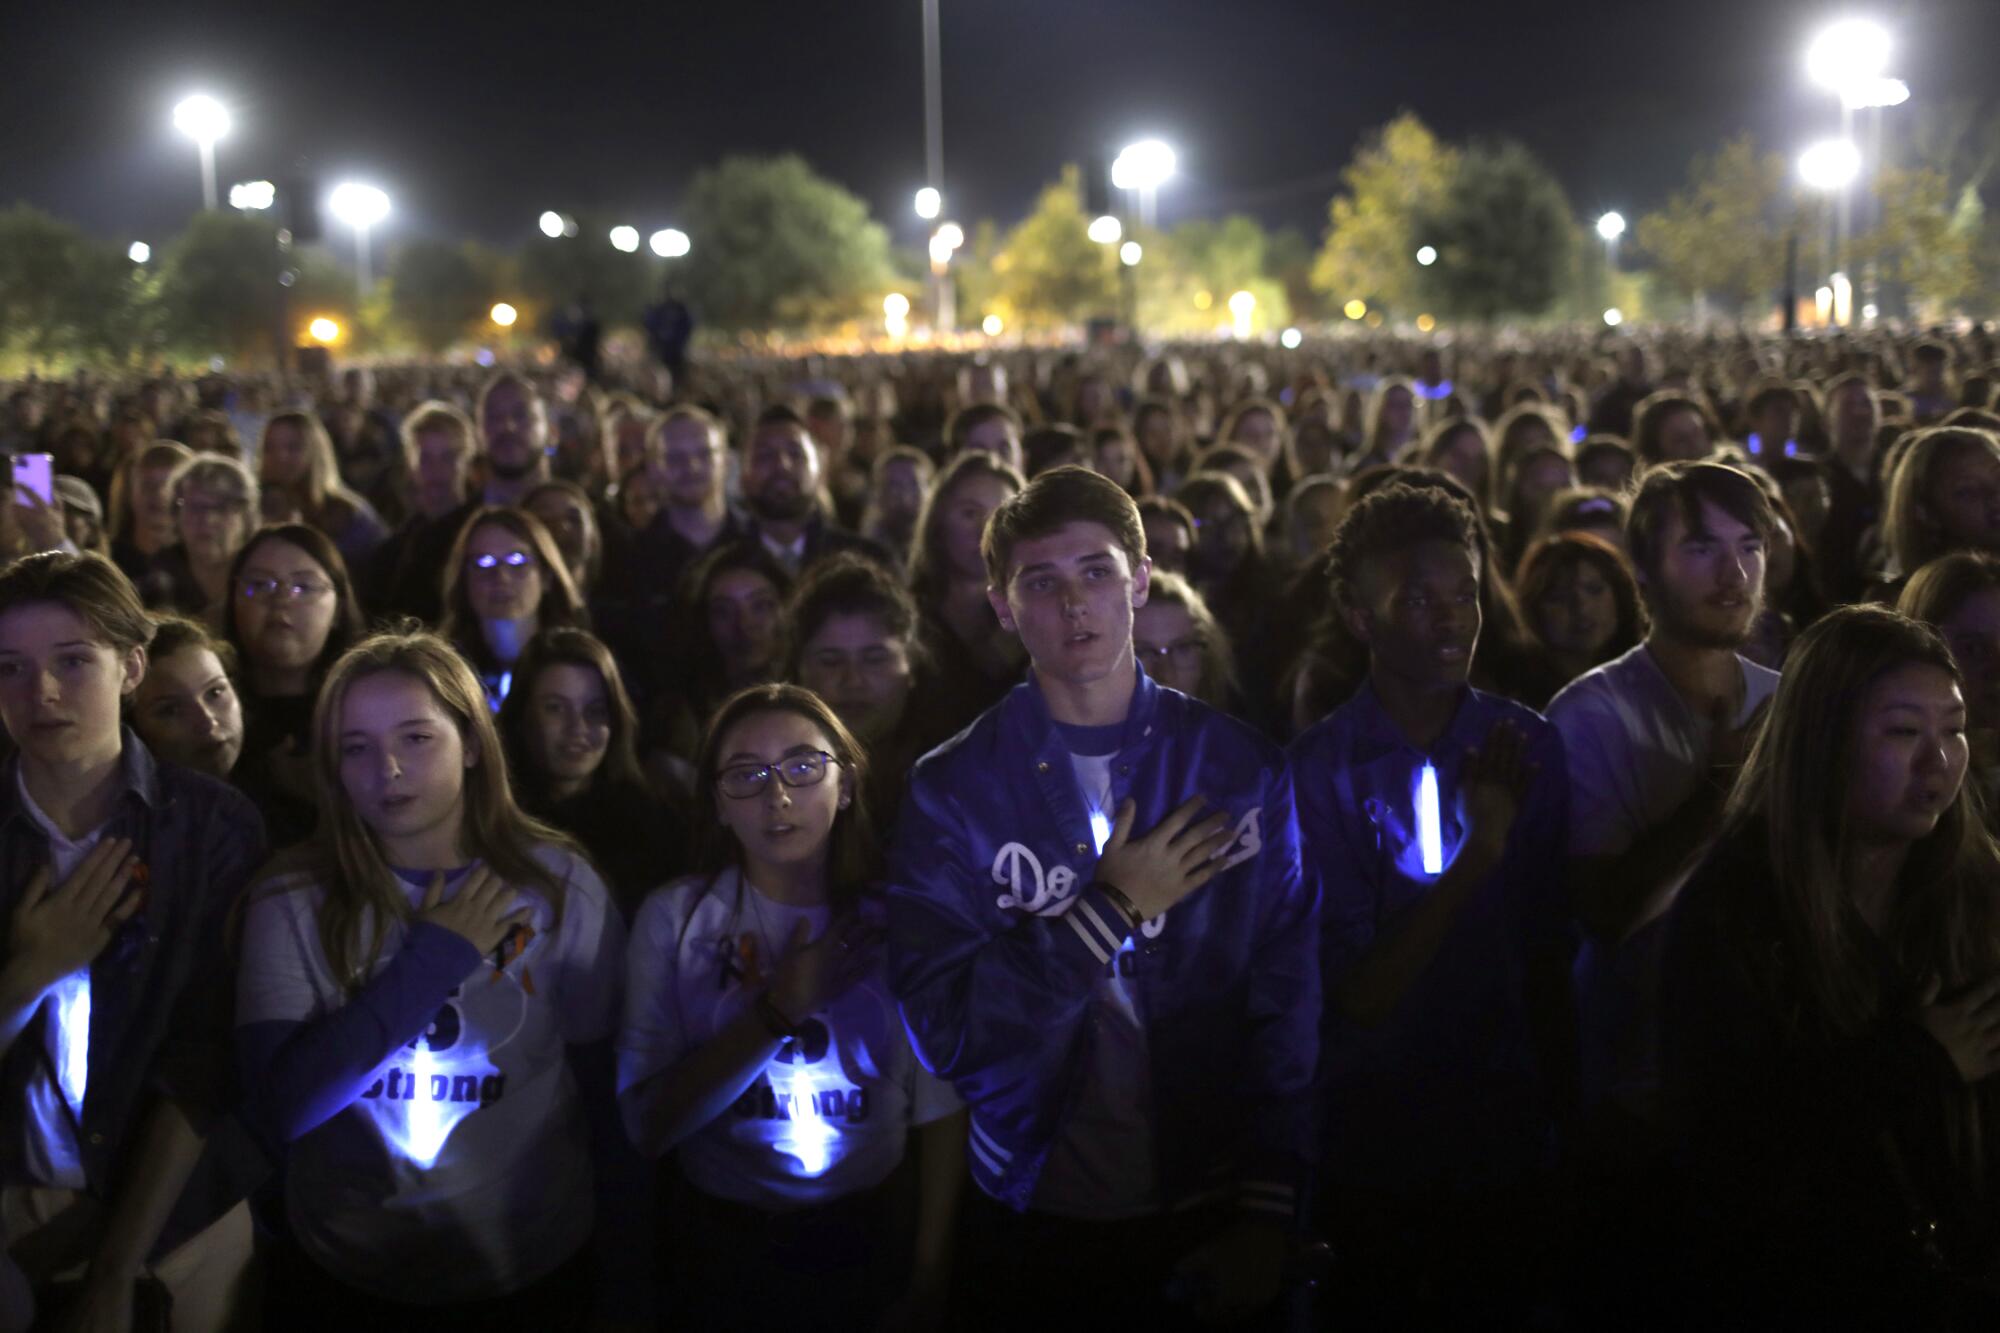 Students gathered in November at Central Park in Santa Clarita to remember those killed in a shooting at Saugus High School earlier in the month.